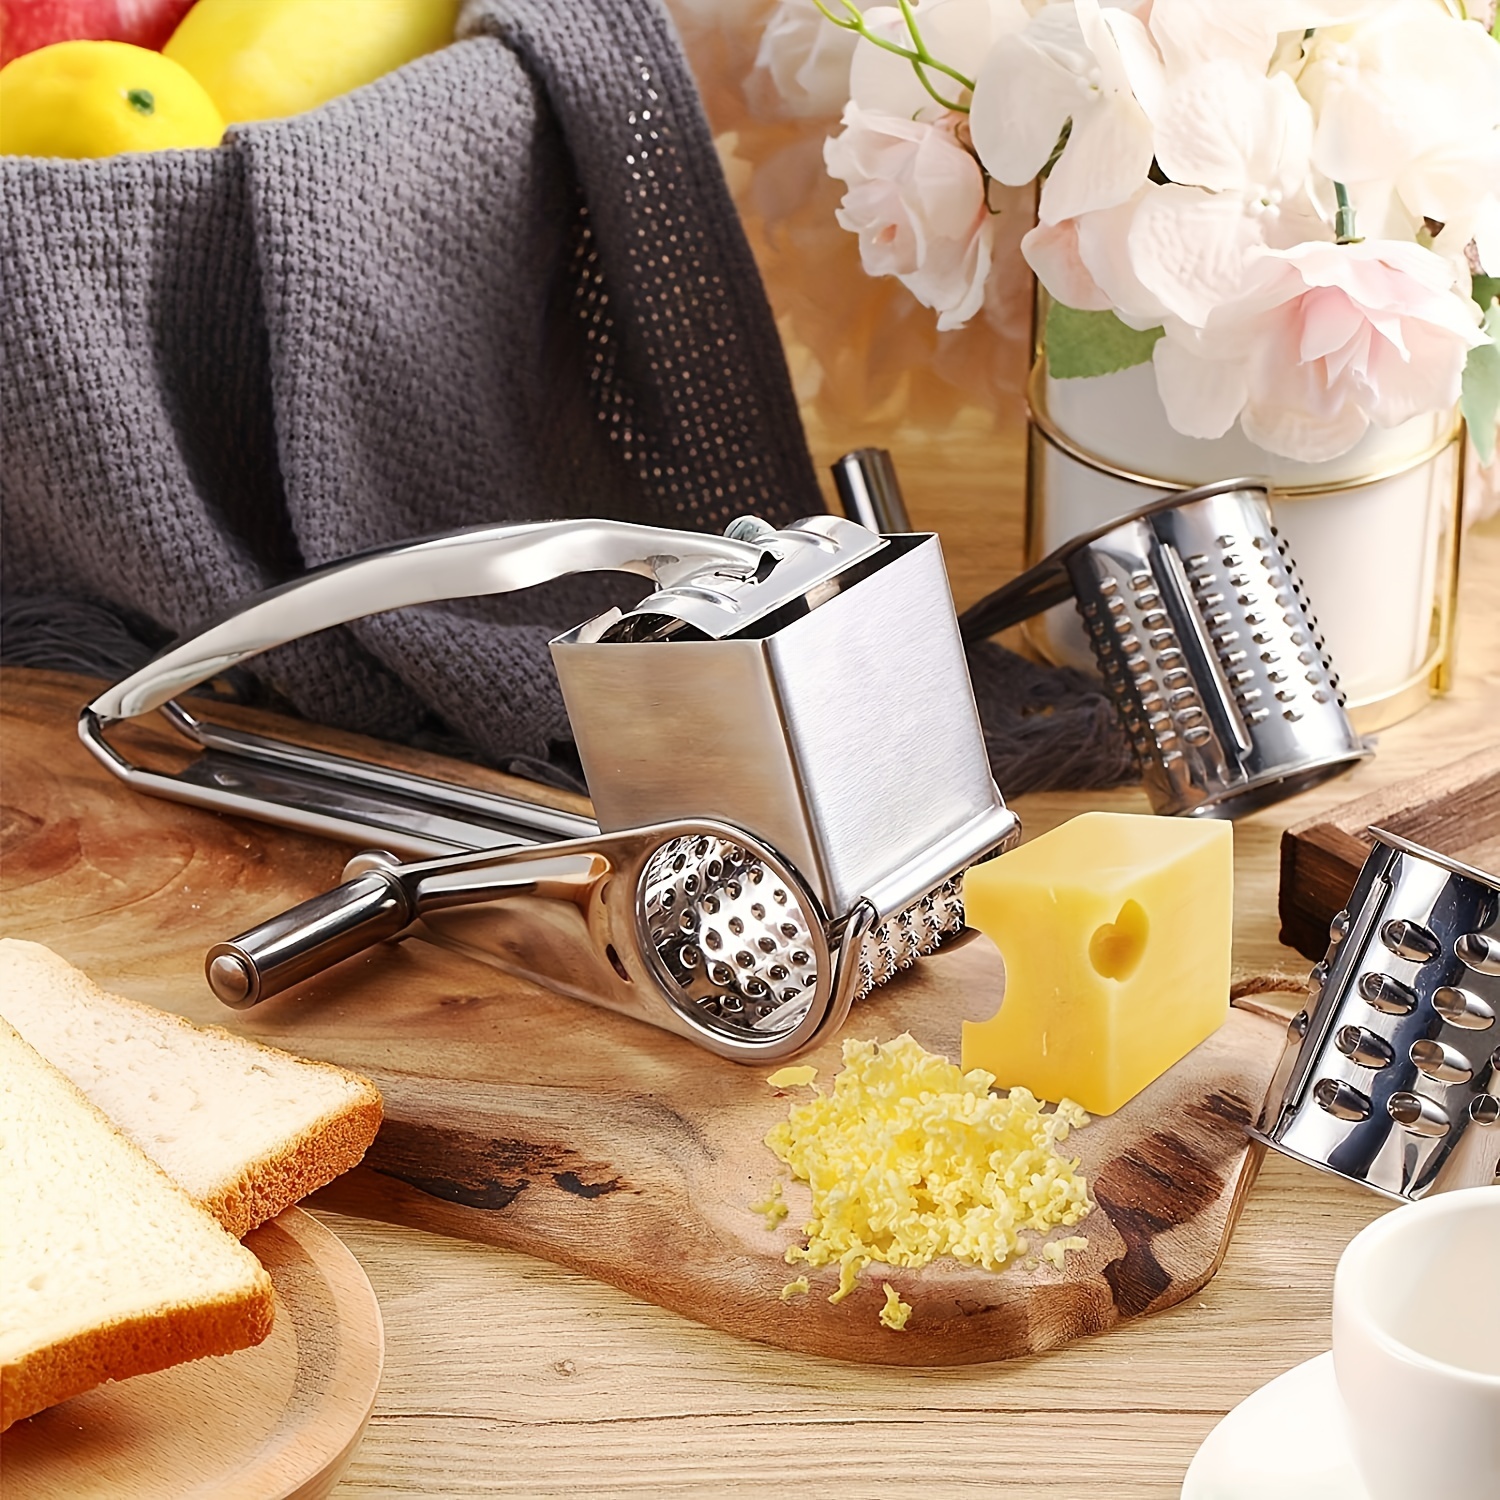 1pc Cheese Grater, 3 In 1 Hand Shredder, Manual Hand Crank